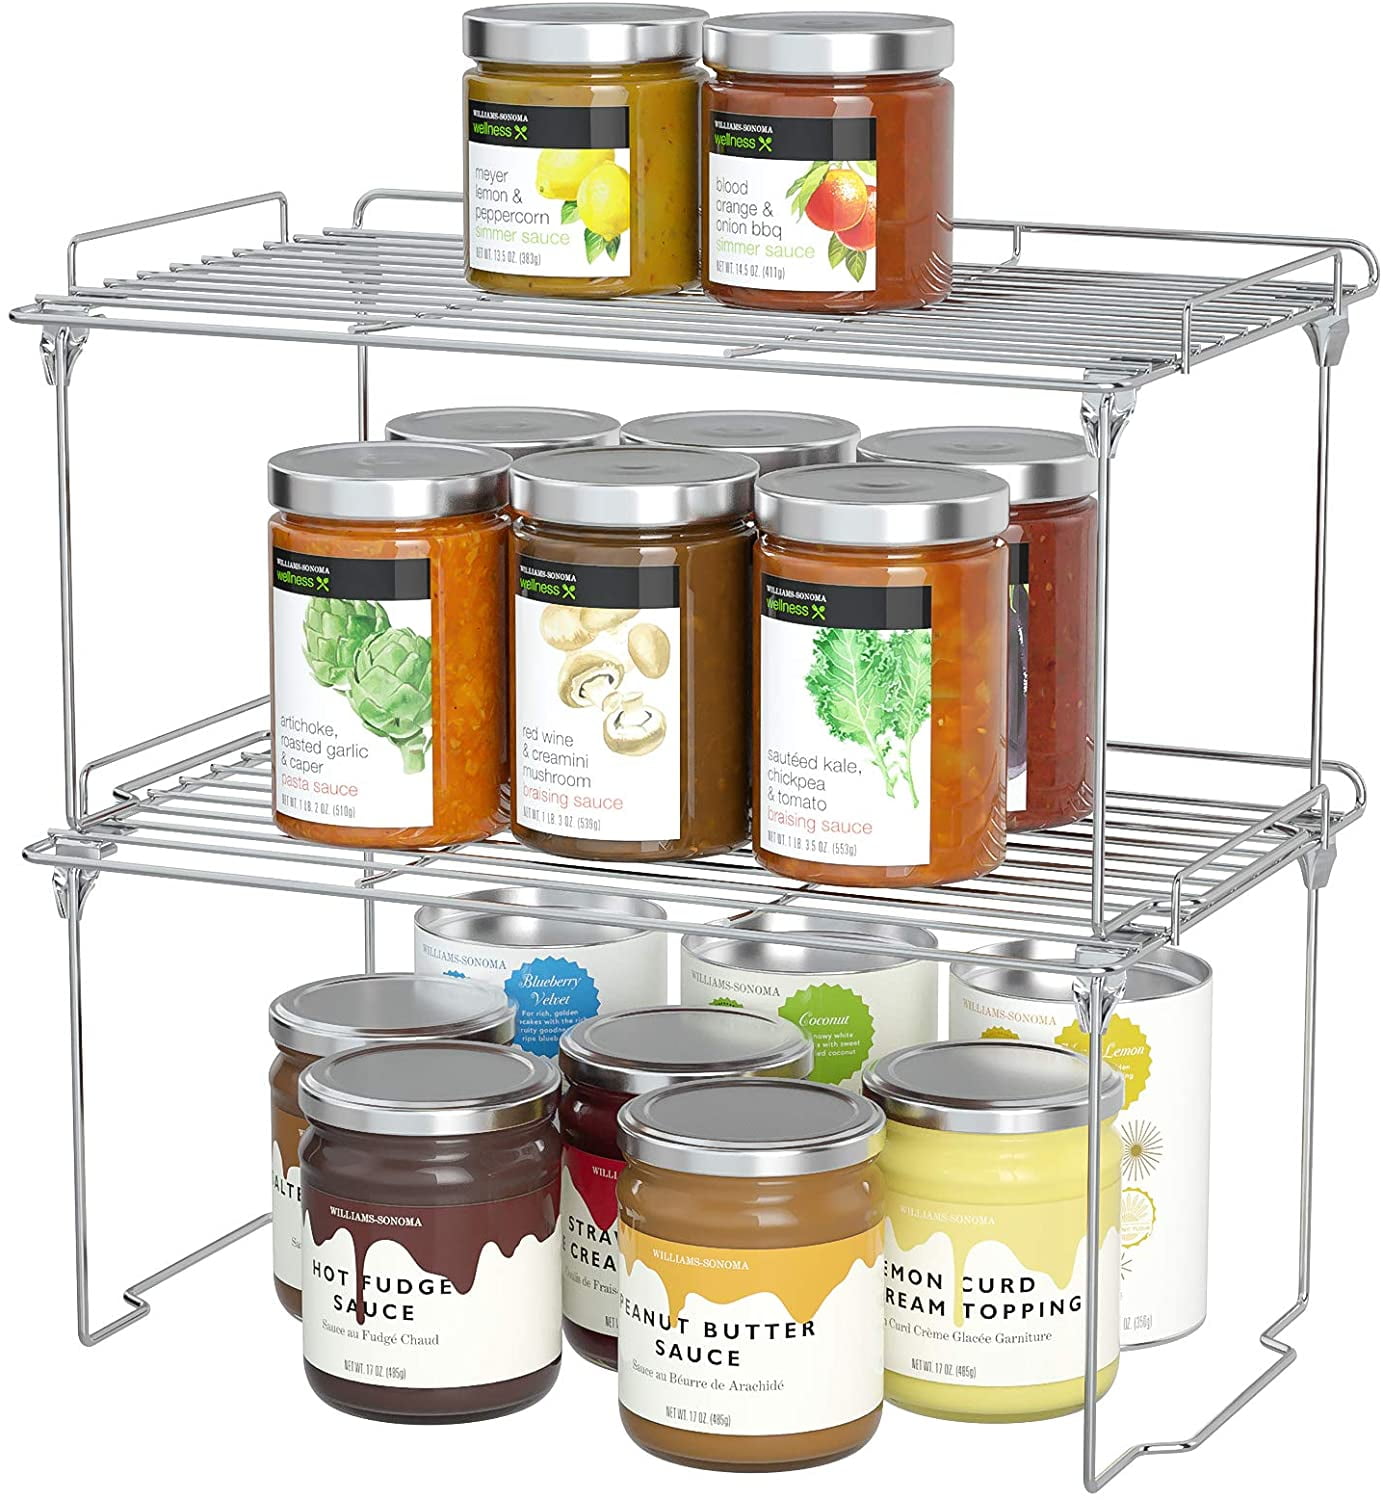 Kitchen Cabinet Organizer and Storage Shelves, Stackable Storage Racks for  Cabinet Pantry, spice rack, Riser and Jar Organizers For Seasoning, white